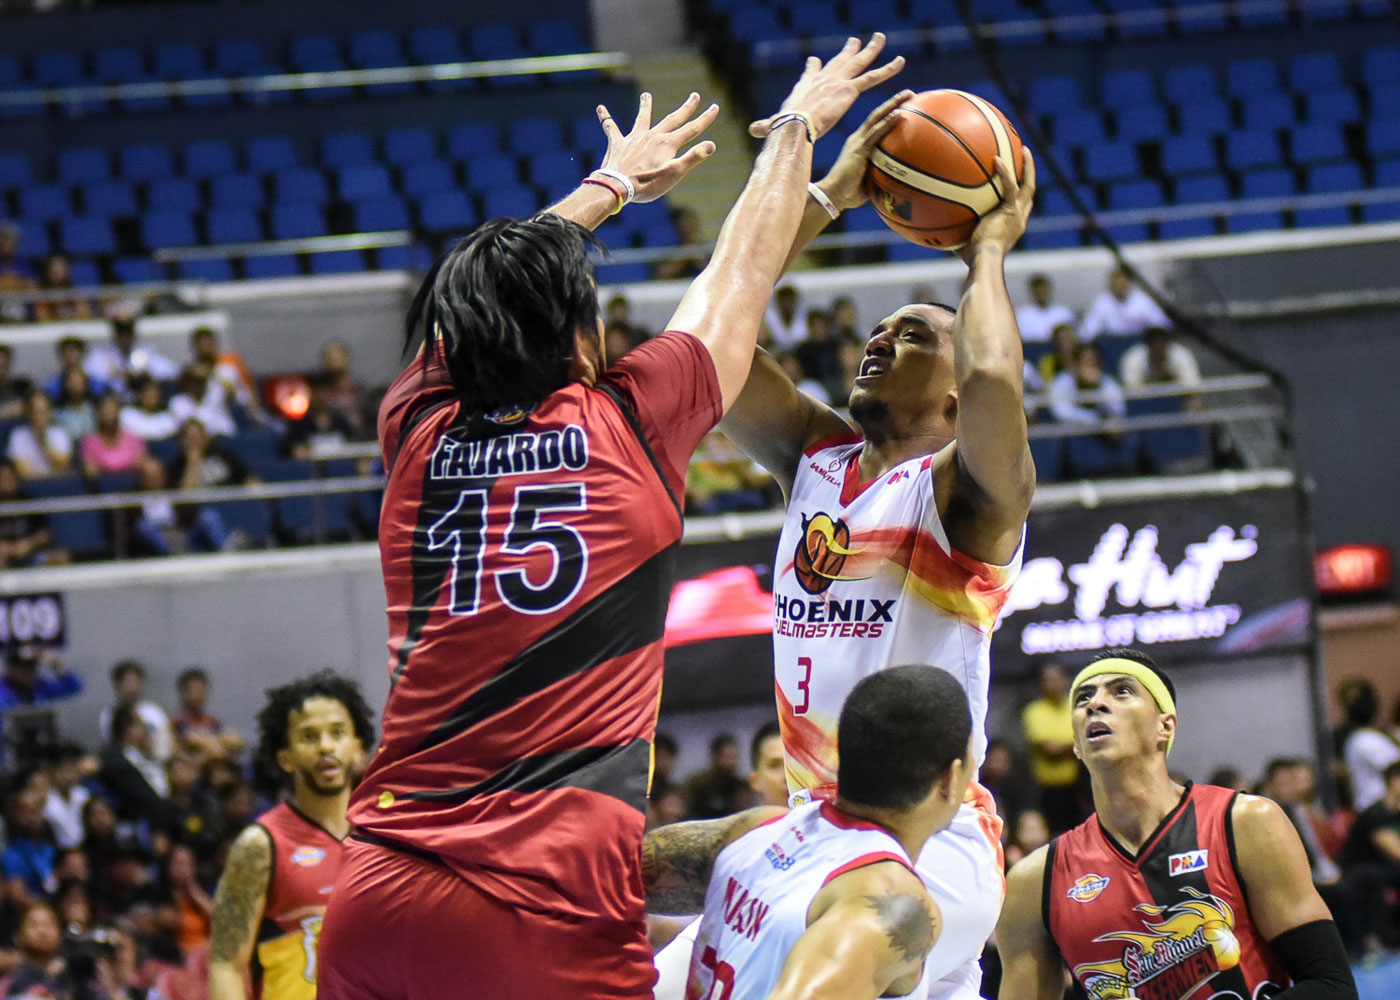 ROUGH DEBUT. Jason Perkins had 10 points and 9 rebounds in his PBA debut but admits he has much to learn as a rookie in the PBA. Photo by Jerrick Reymarc/Rappler 